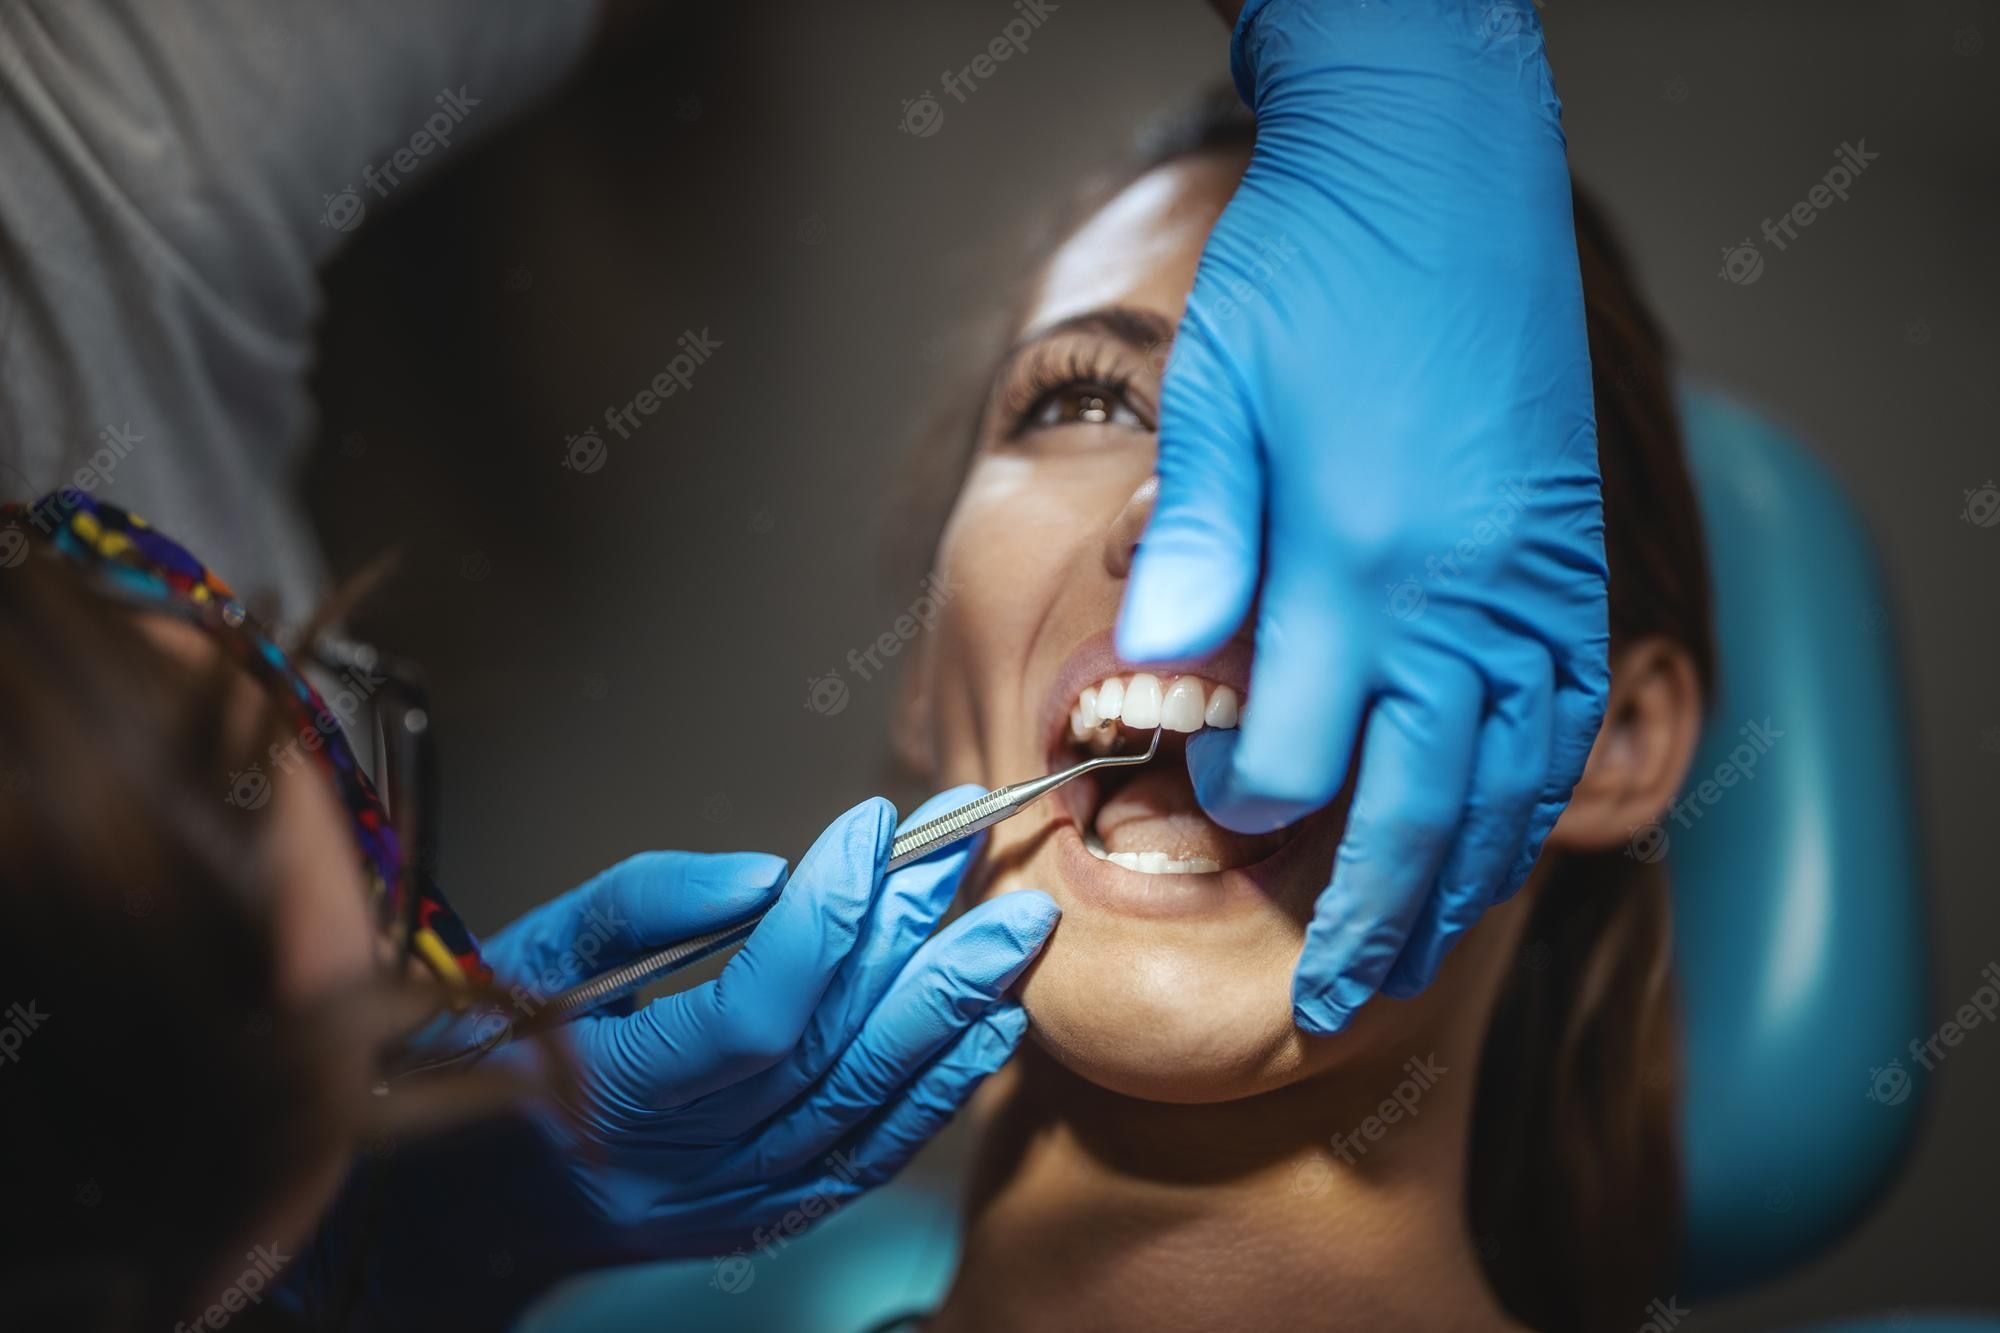 A woman having her teeth checked at the dentist - Dentist